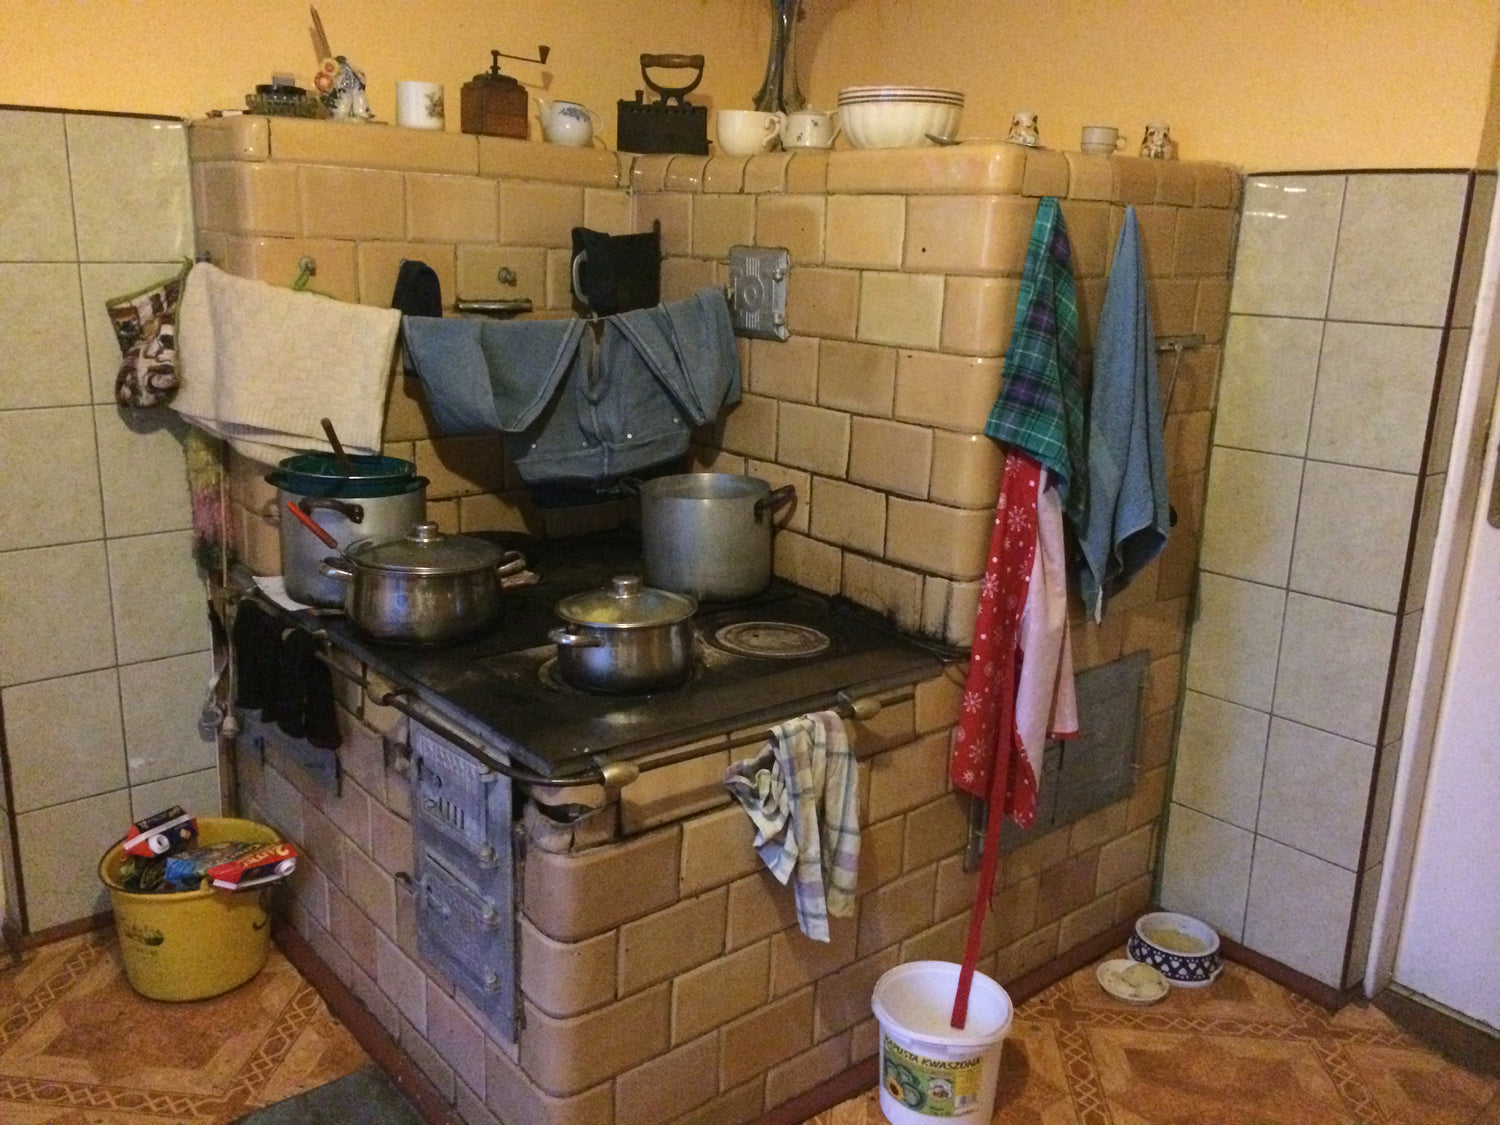 polish brick oven with cooking pans and laundry on display